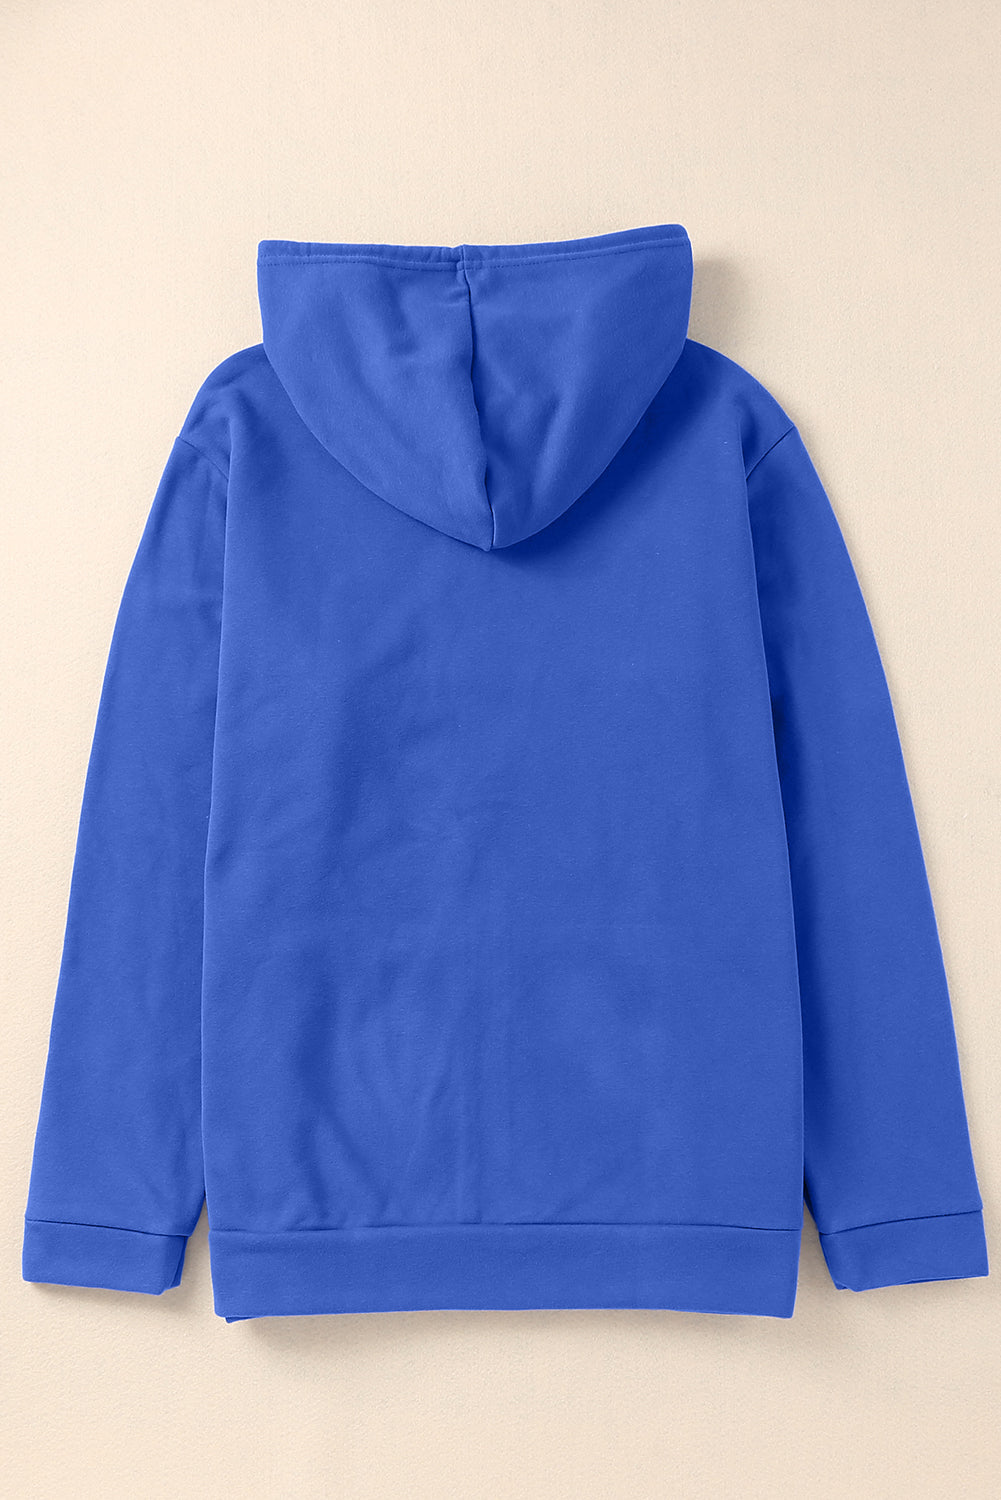 Steel Blue Plus Size Zip Up Hooded Jacket with Pocket